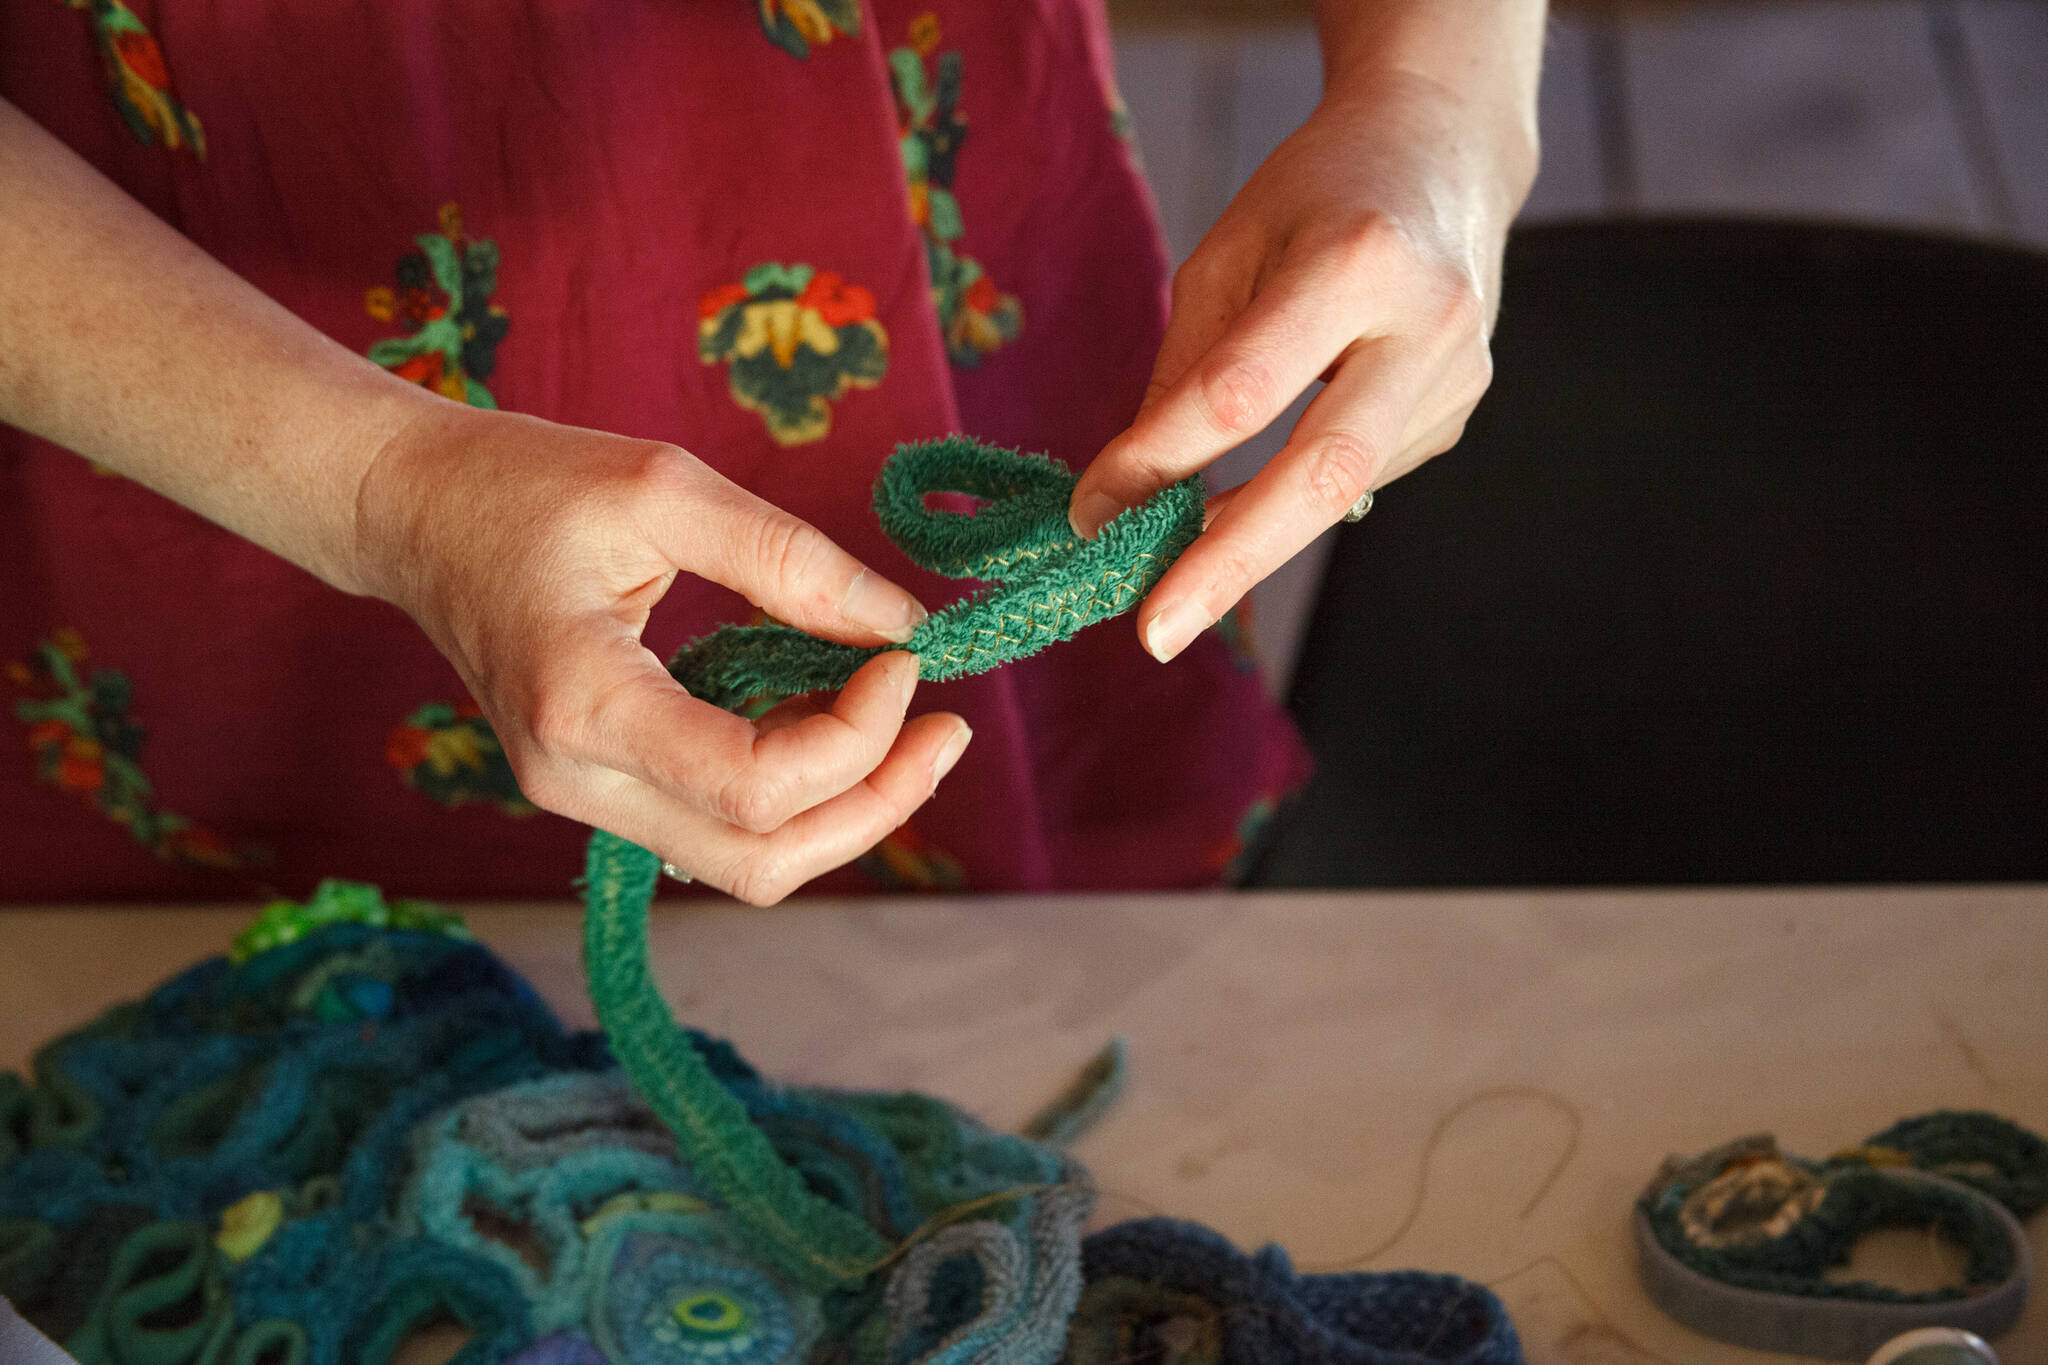 Amanda Triplett, Mary Olson Farm’s current Artist in Residence, explains the process of creating textile sculptures from scrap fabrics. Photo by Henry Stewart-Wood/Sound Publishing